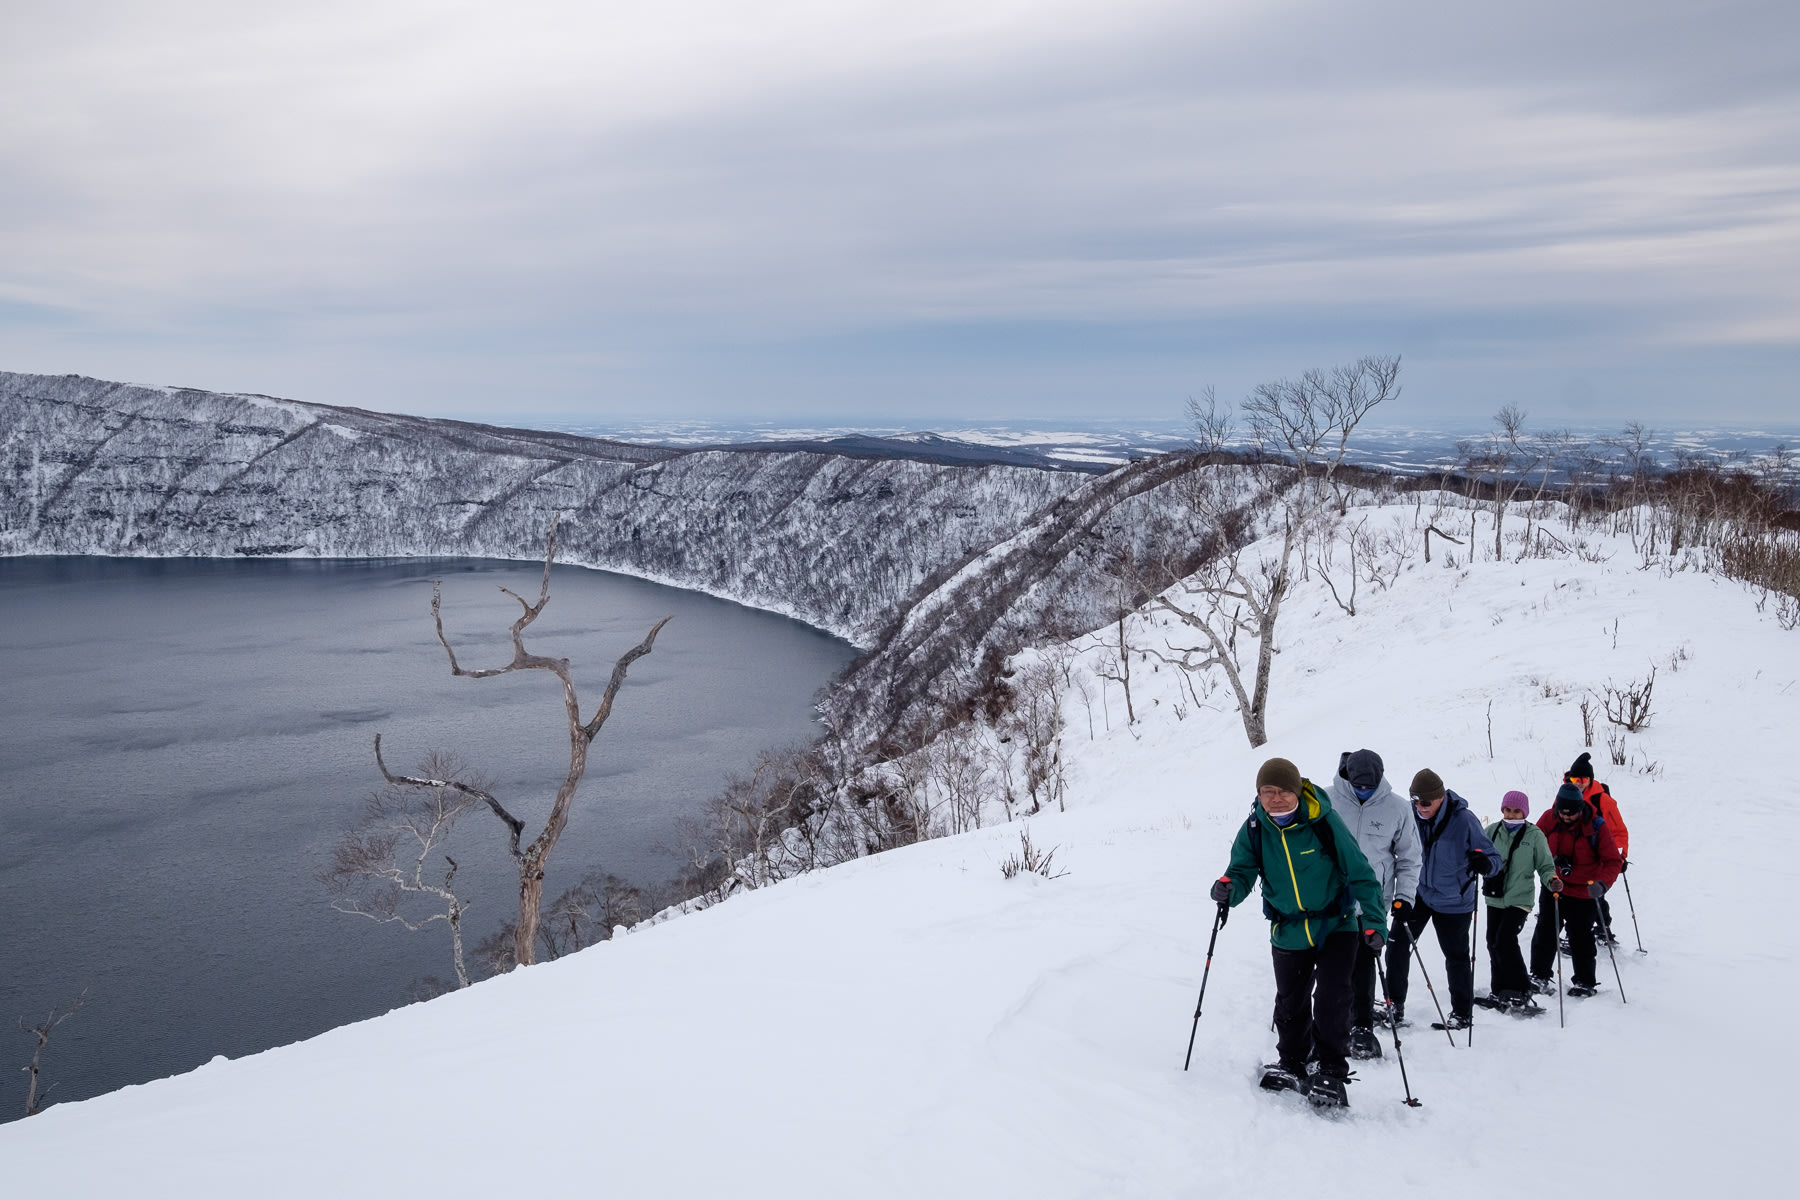 A guide leads a group of snowshoers along the edge of the Lake Mashu crater